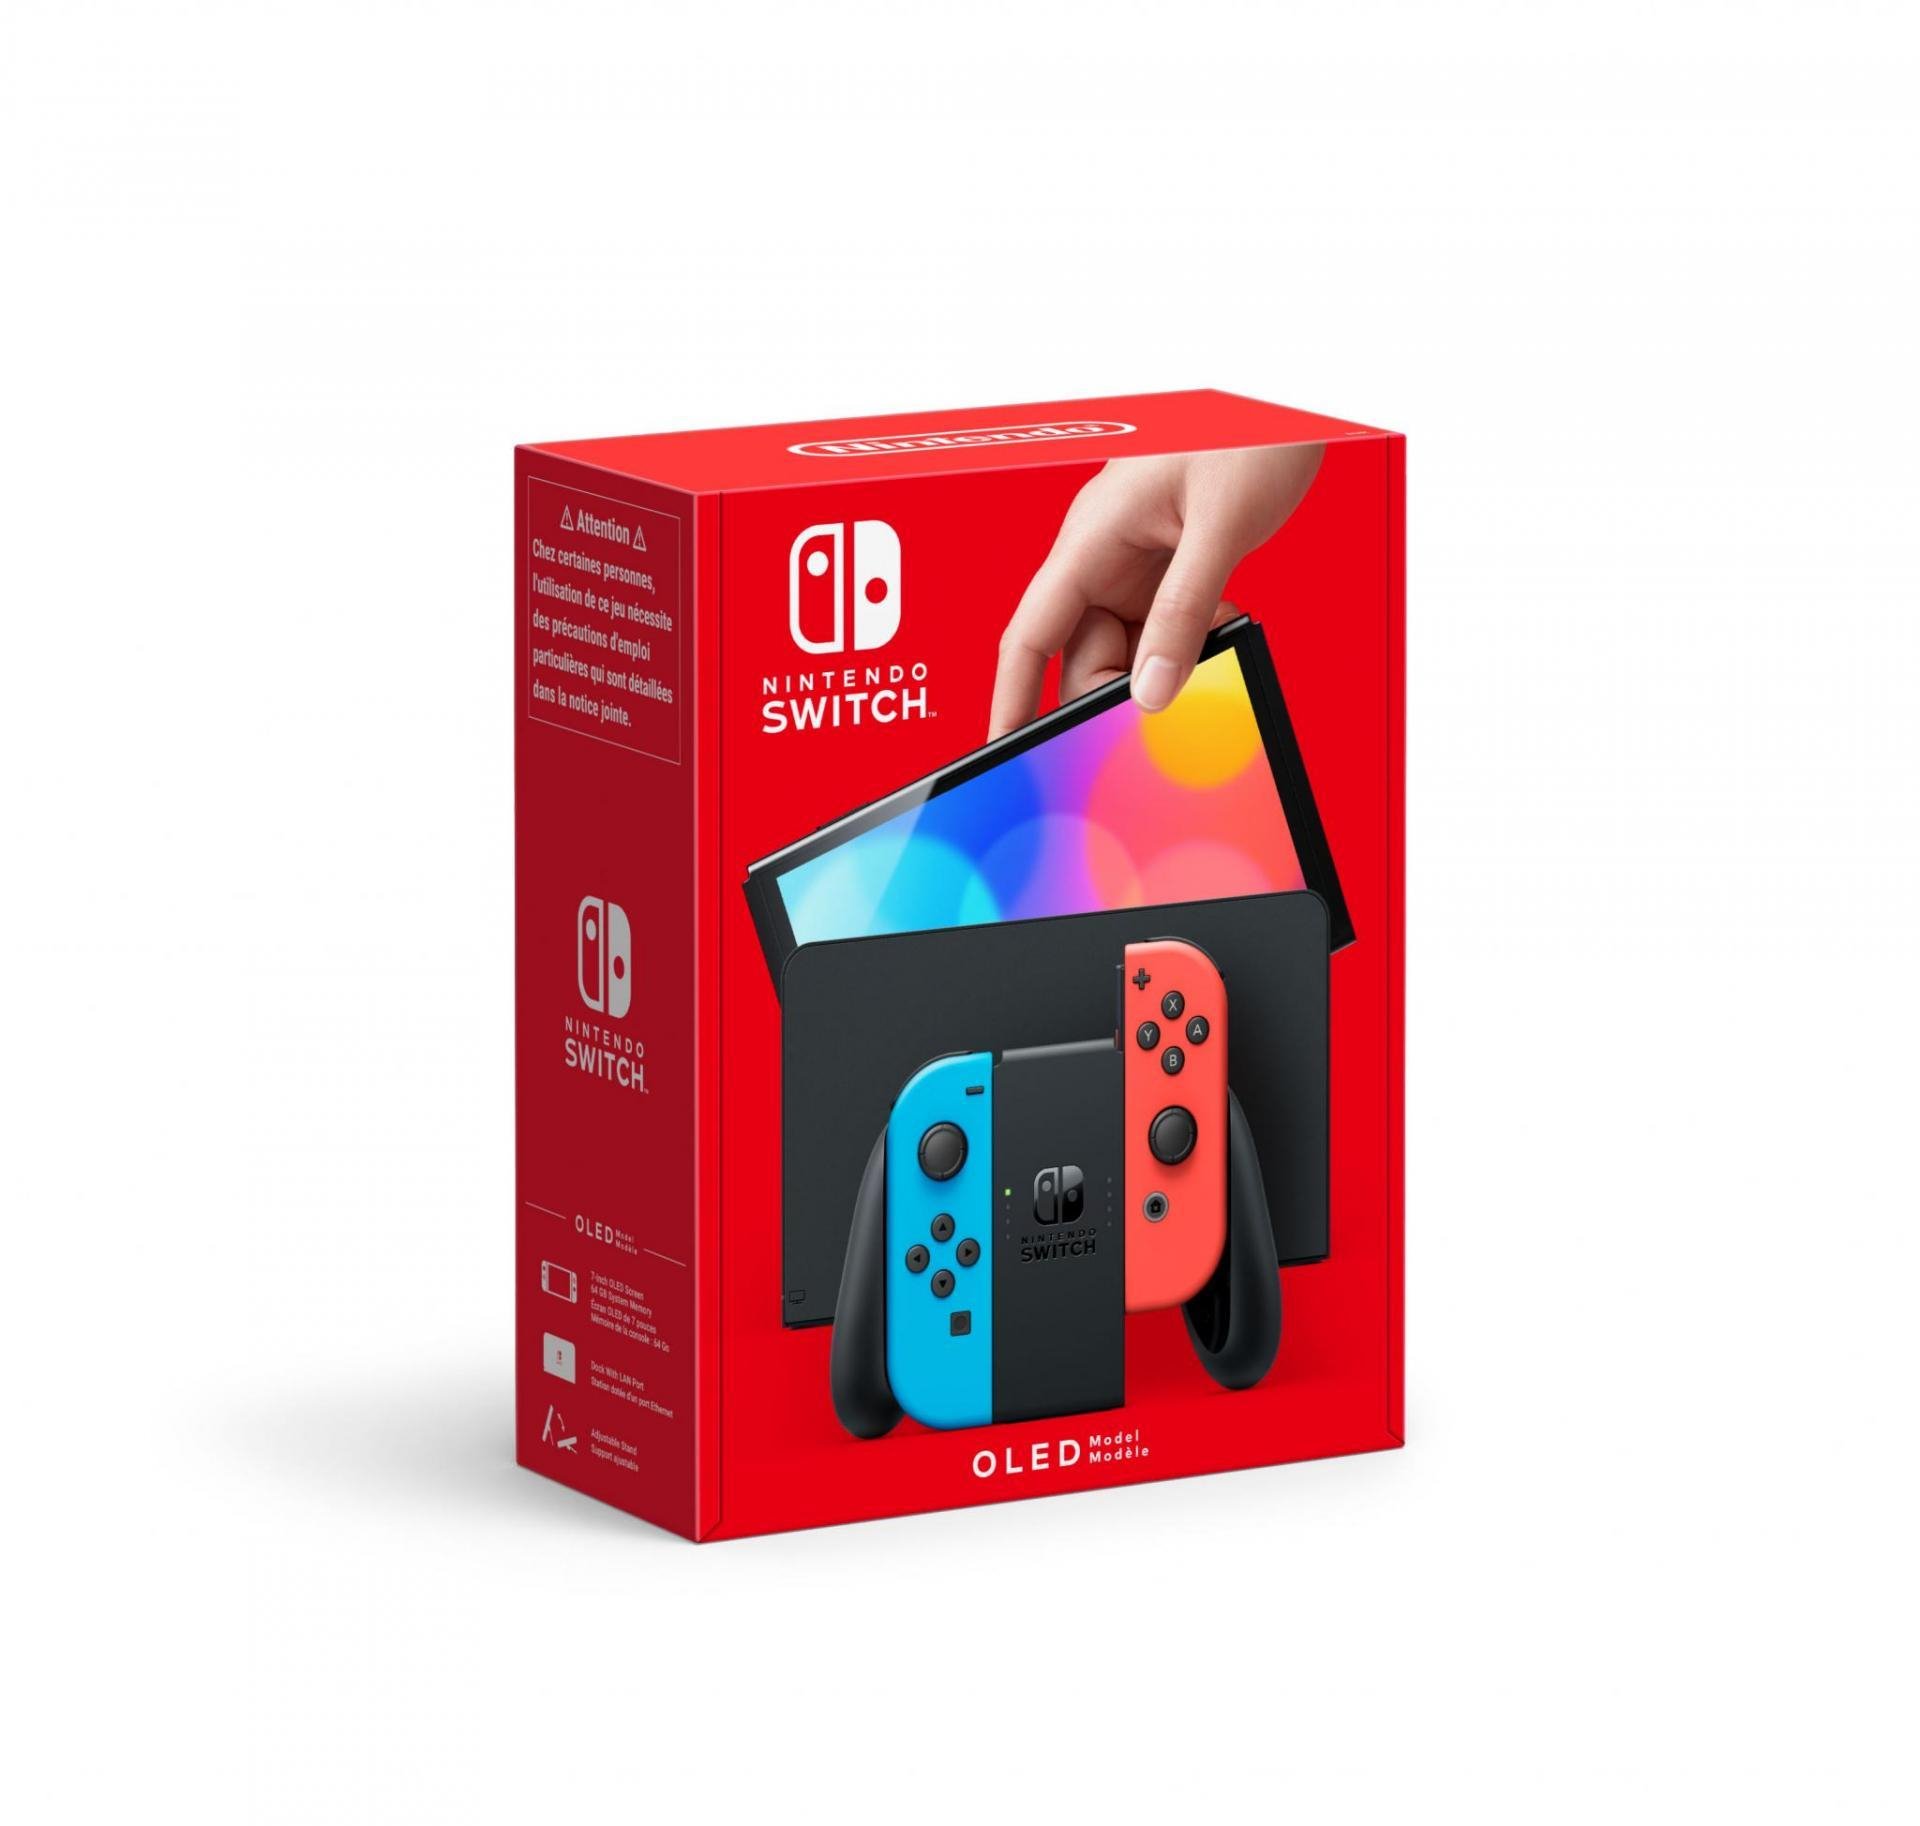 Nintendo Switch (OLED model) Neon Red&Blue